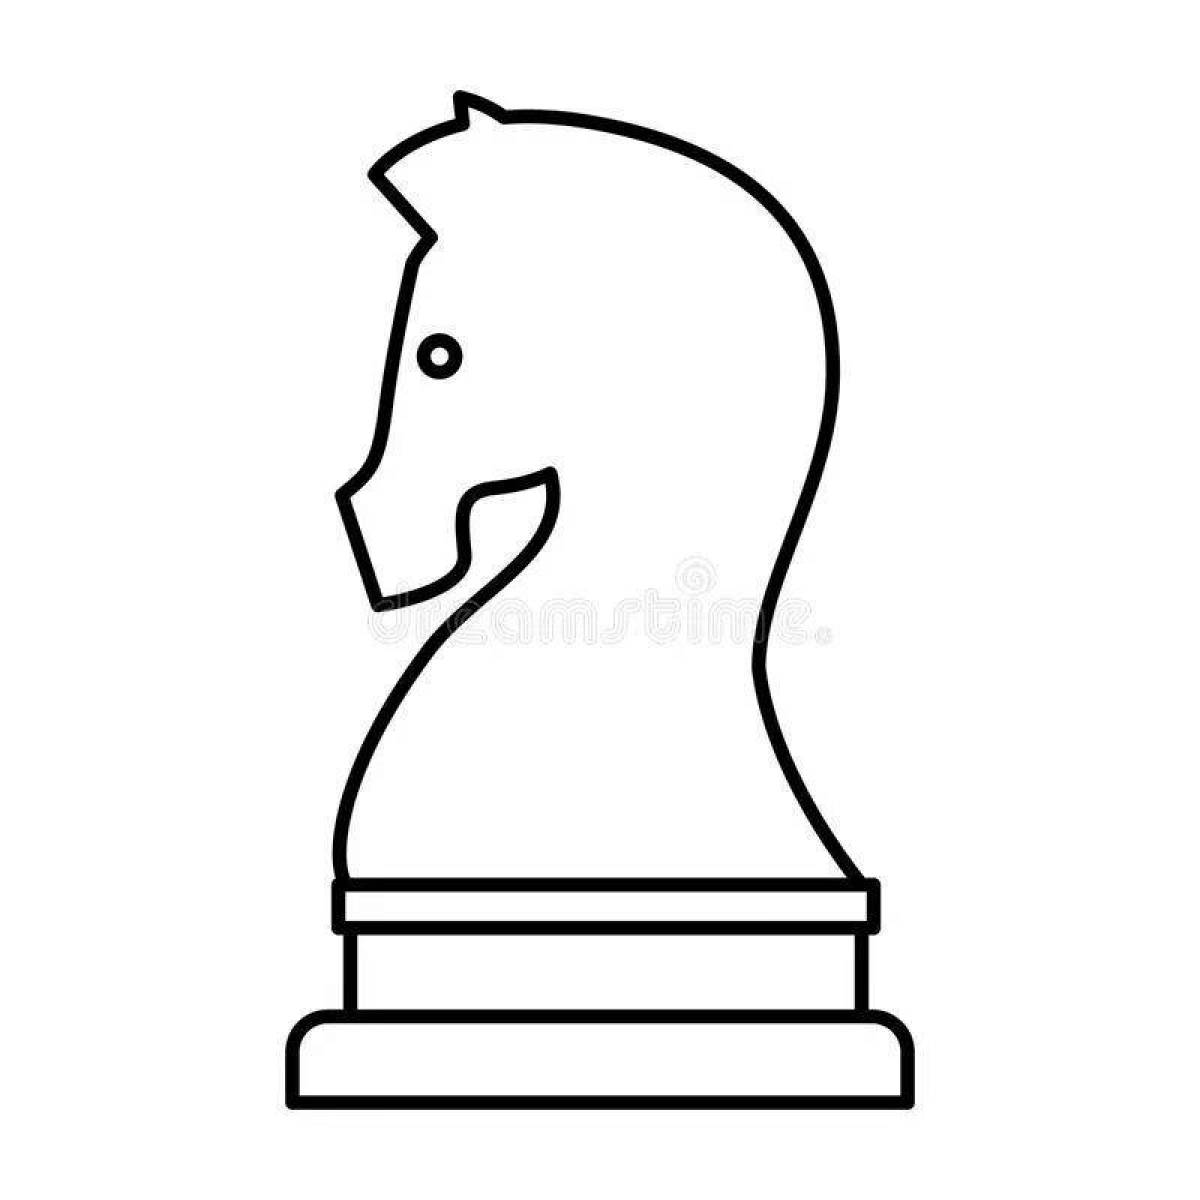 Coloring page elegant chess horse